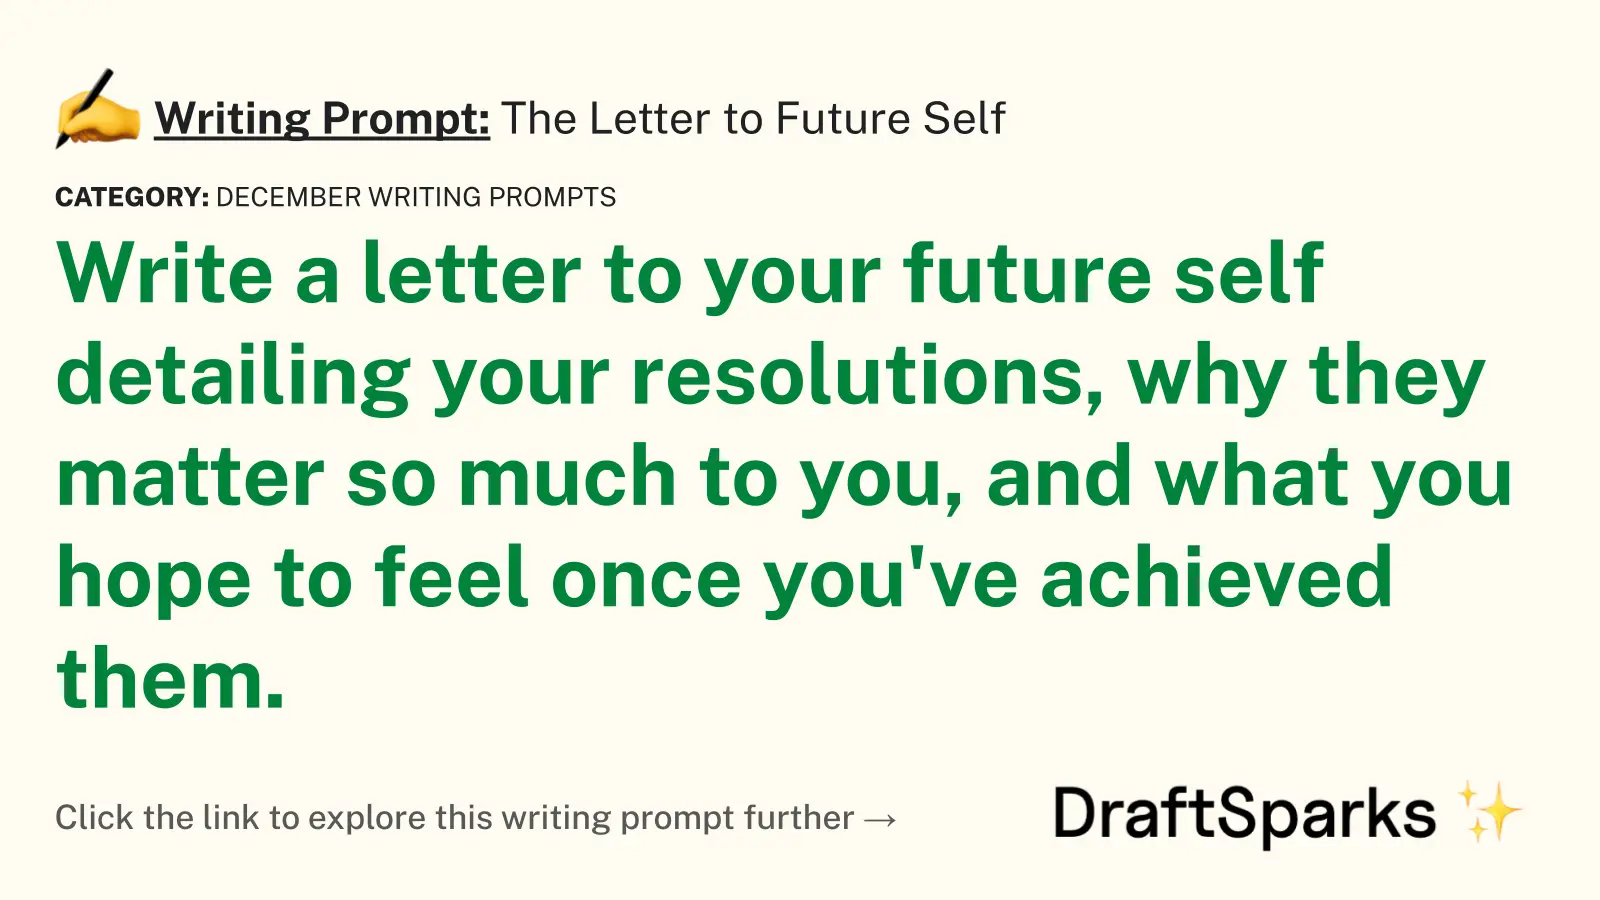 The Letter to Future Self